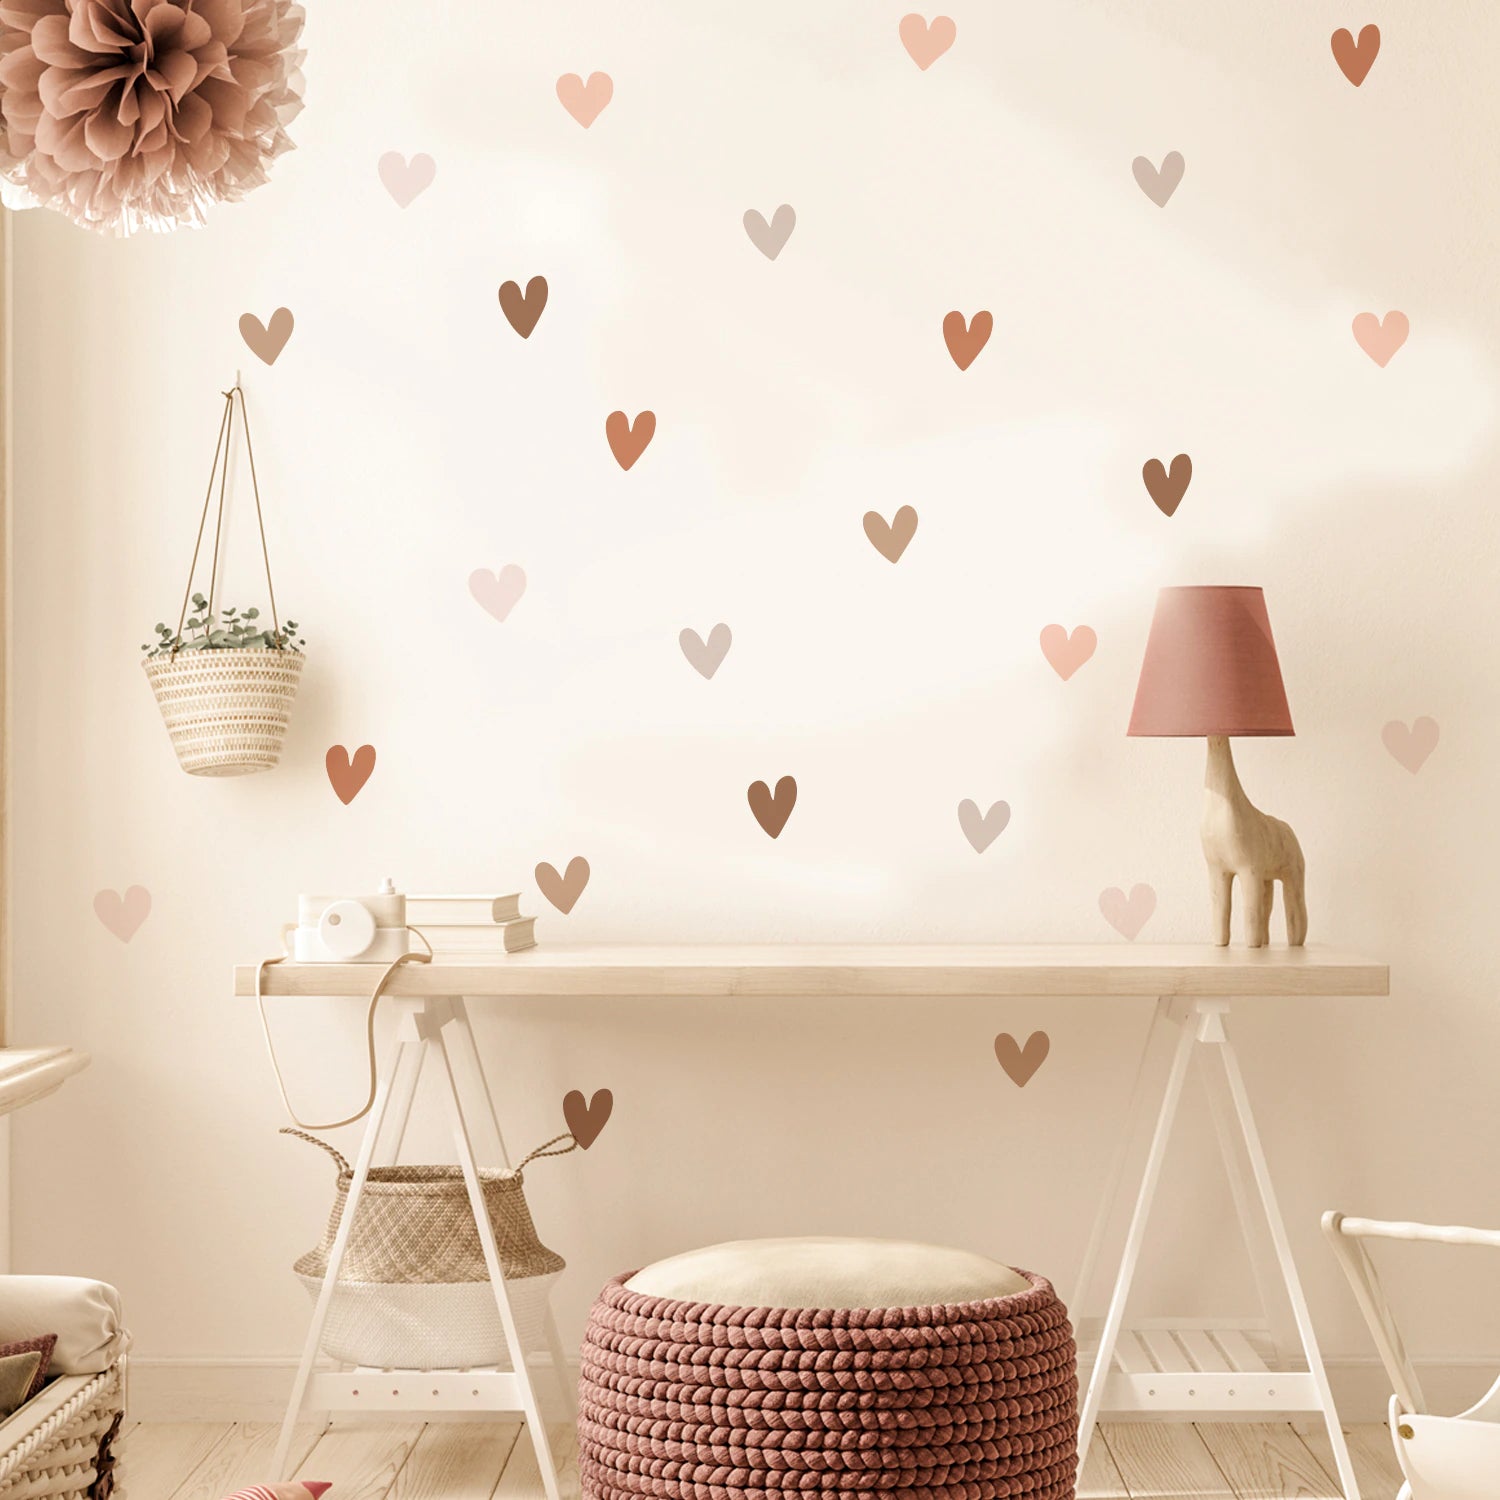 Cute Bohemian Hearts Wall Decals Neutral Colors Beige Brown Pink Hearts Removable PVC Wall Stickers For Baby's Room Children's Bedroom Nursery Art Decor